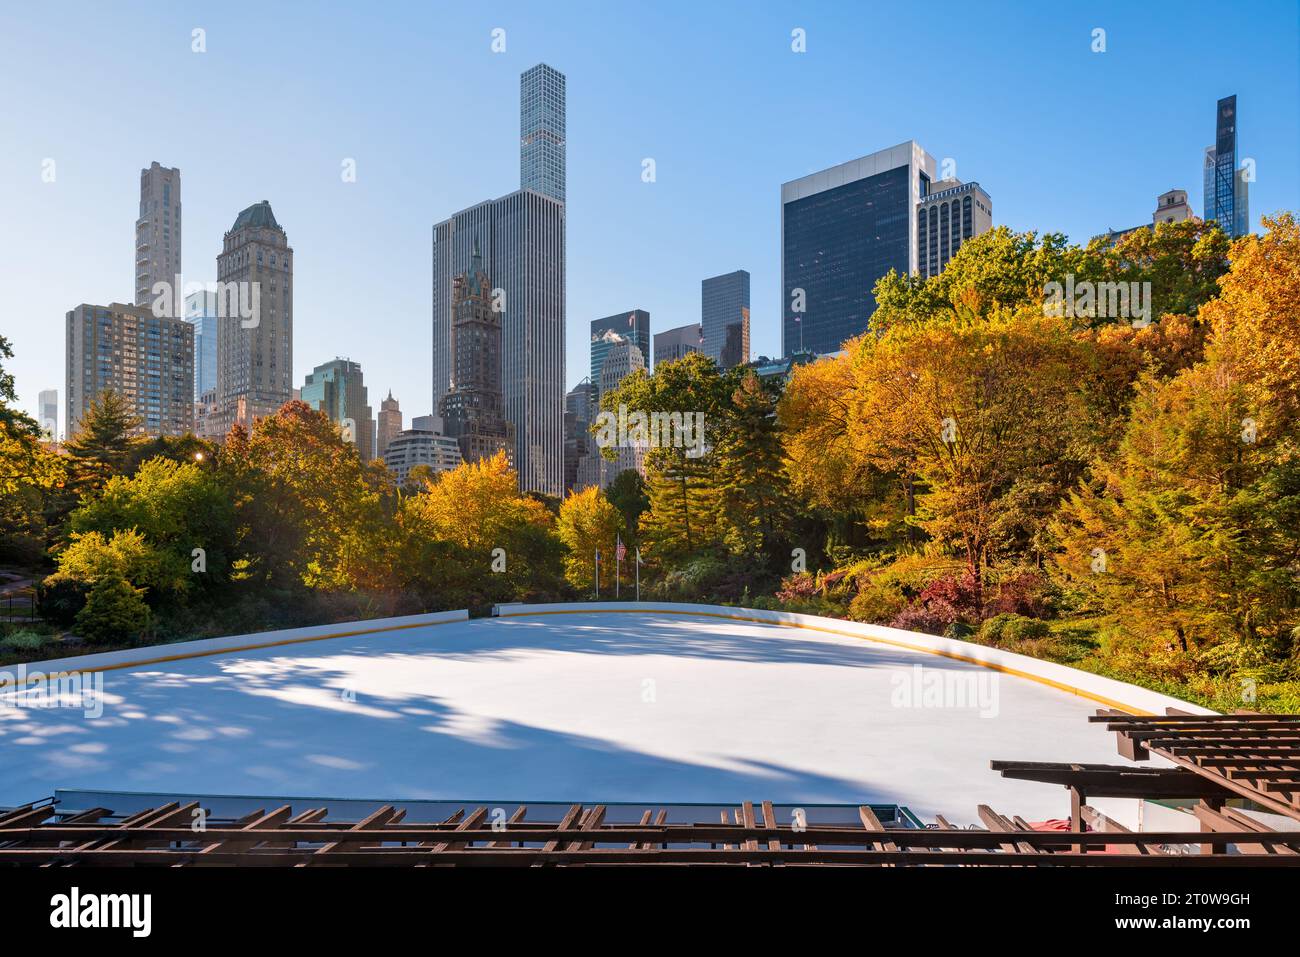 Skating rink in Central Park in autumn with 5th Avenue skyscrapers. Upper East Side, Manhattan, New York City Stock Photo